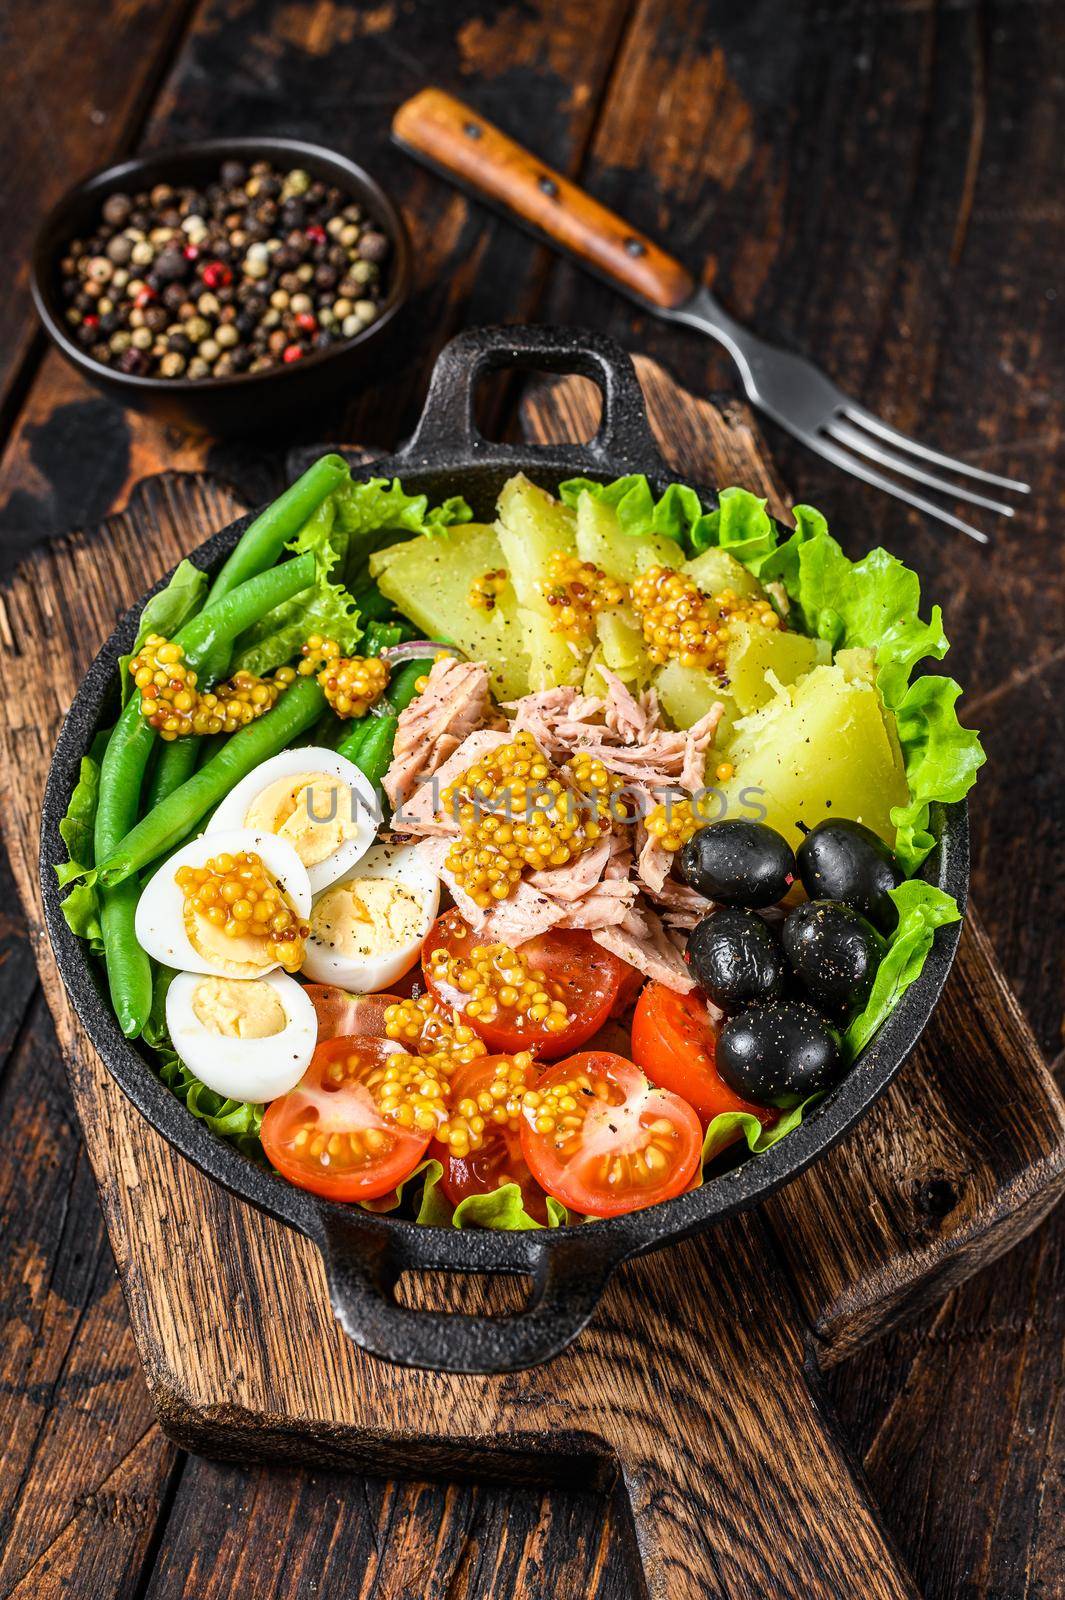 Nicoise salad with tuna, cherry tomatoes, olives, green beans, cucumber, soft boiled eggs and potato. Dark wooden background. top view by Composter